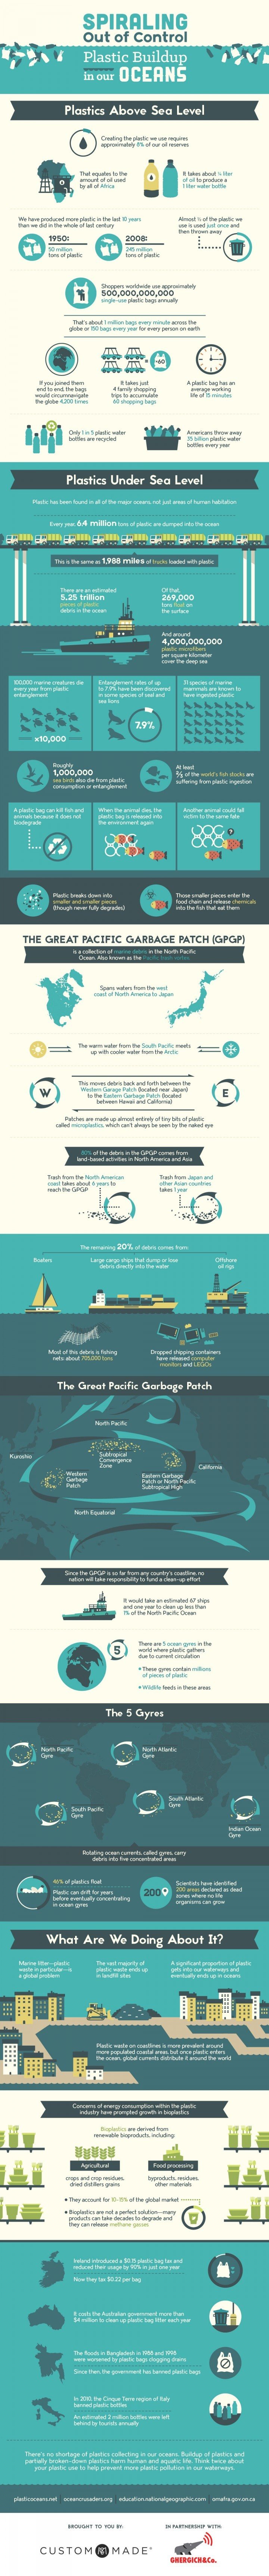 The Shocking Ways Plastic is Polluting Our Oceans (INFOGRAPHIC)